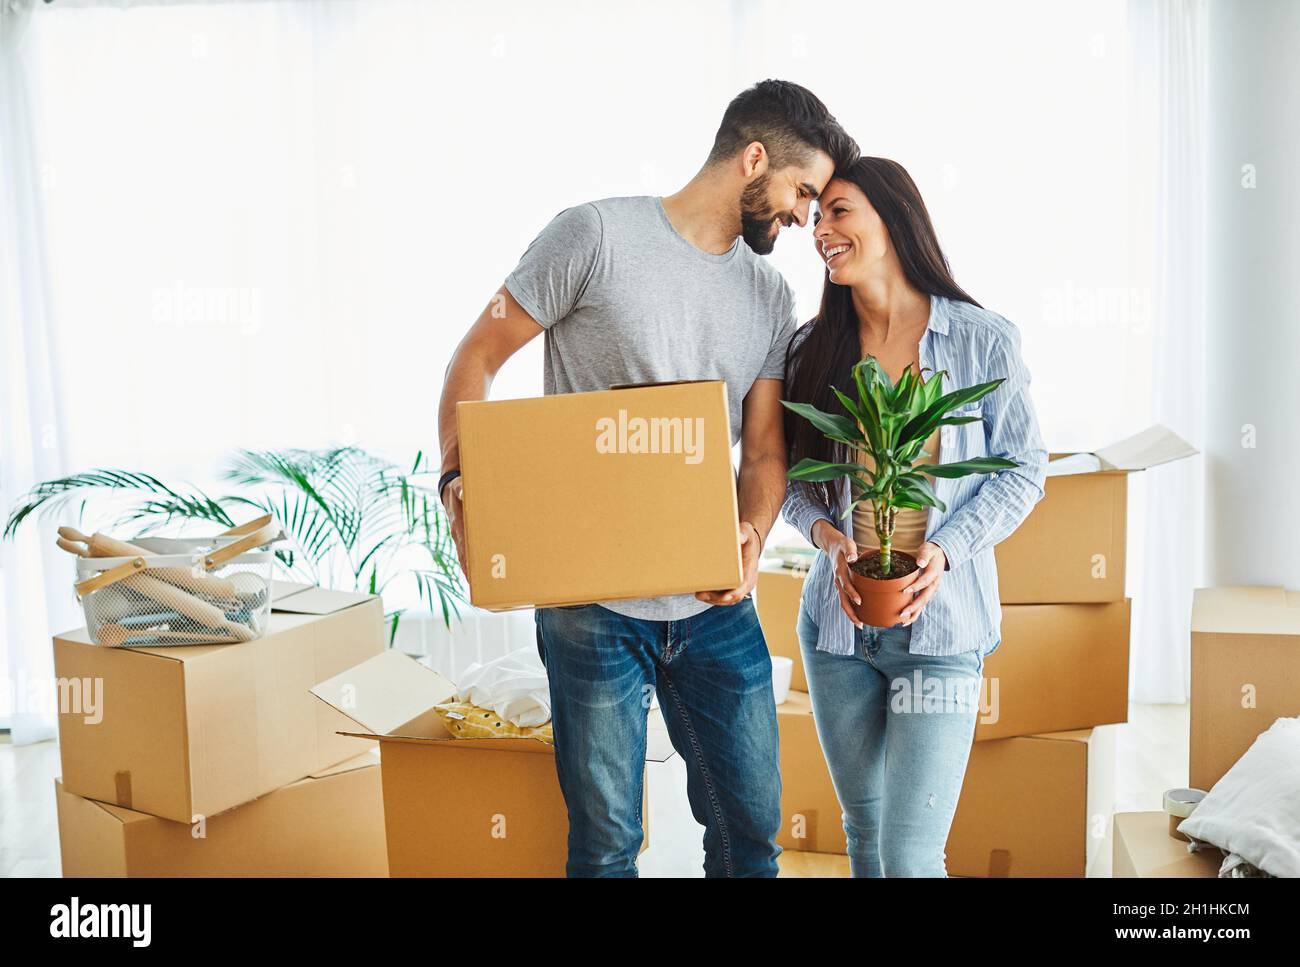 woman couple man box home house moving happy apartment together romantic relocation new property Stock Photo